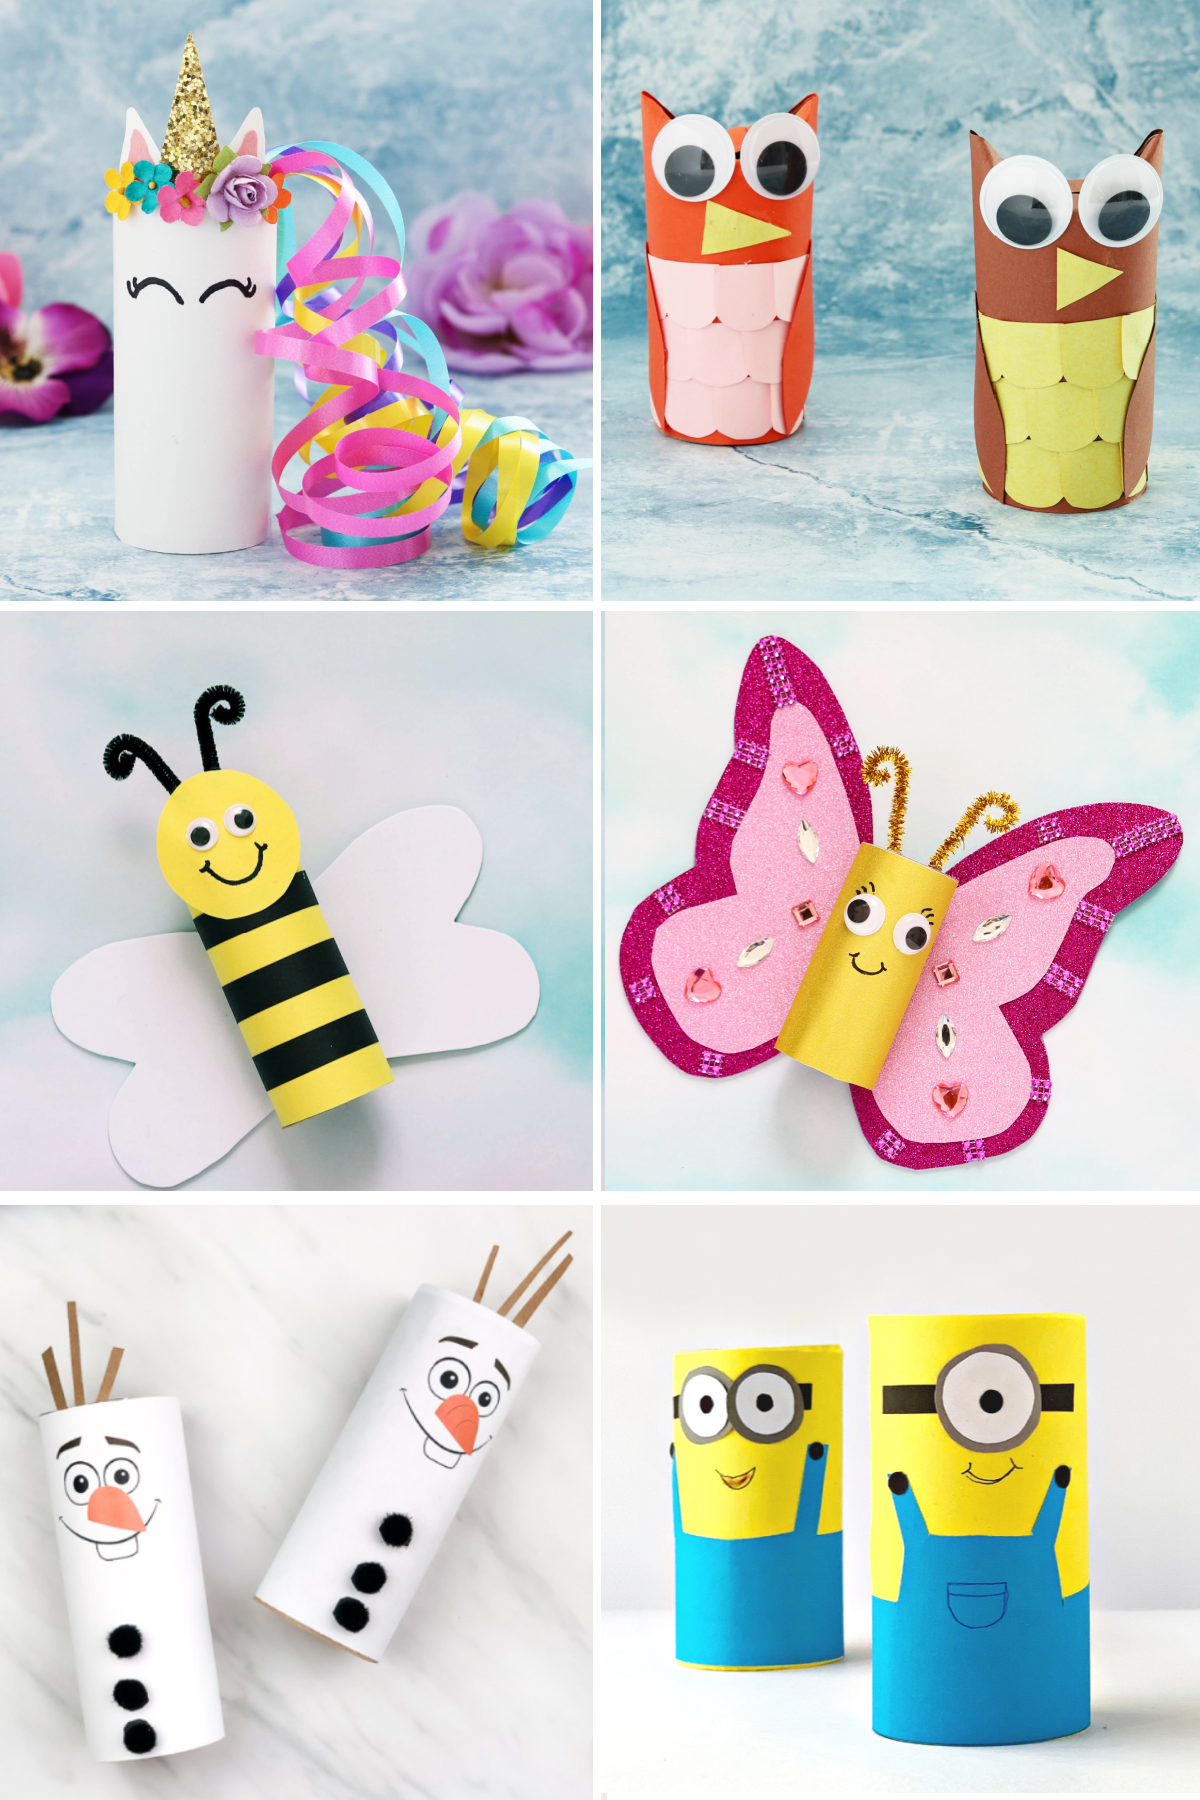 A collage of toilet paper roll crafts for kids.